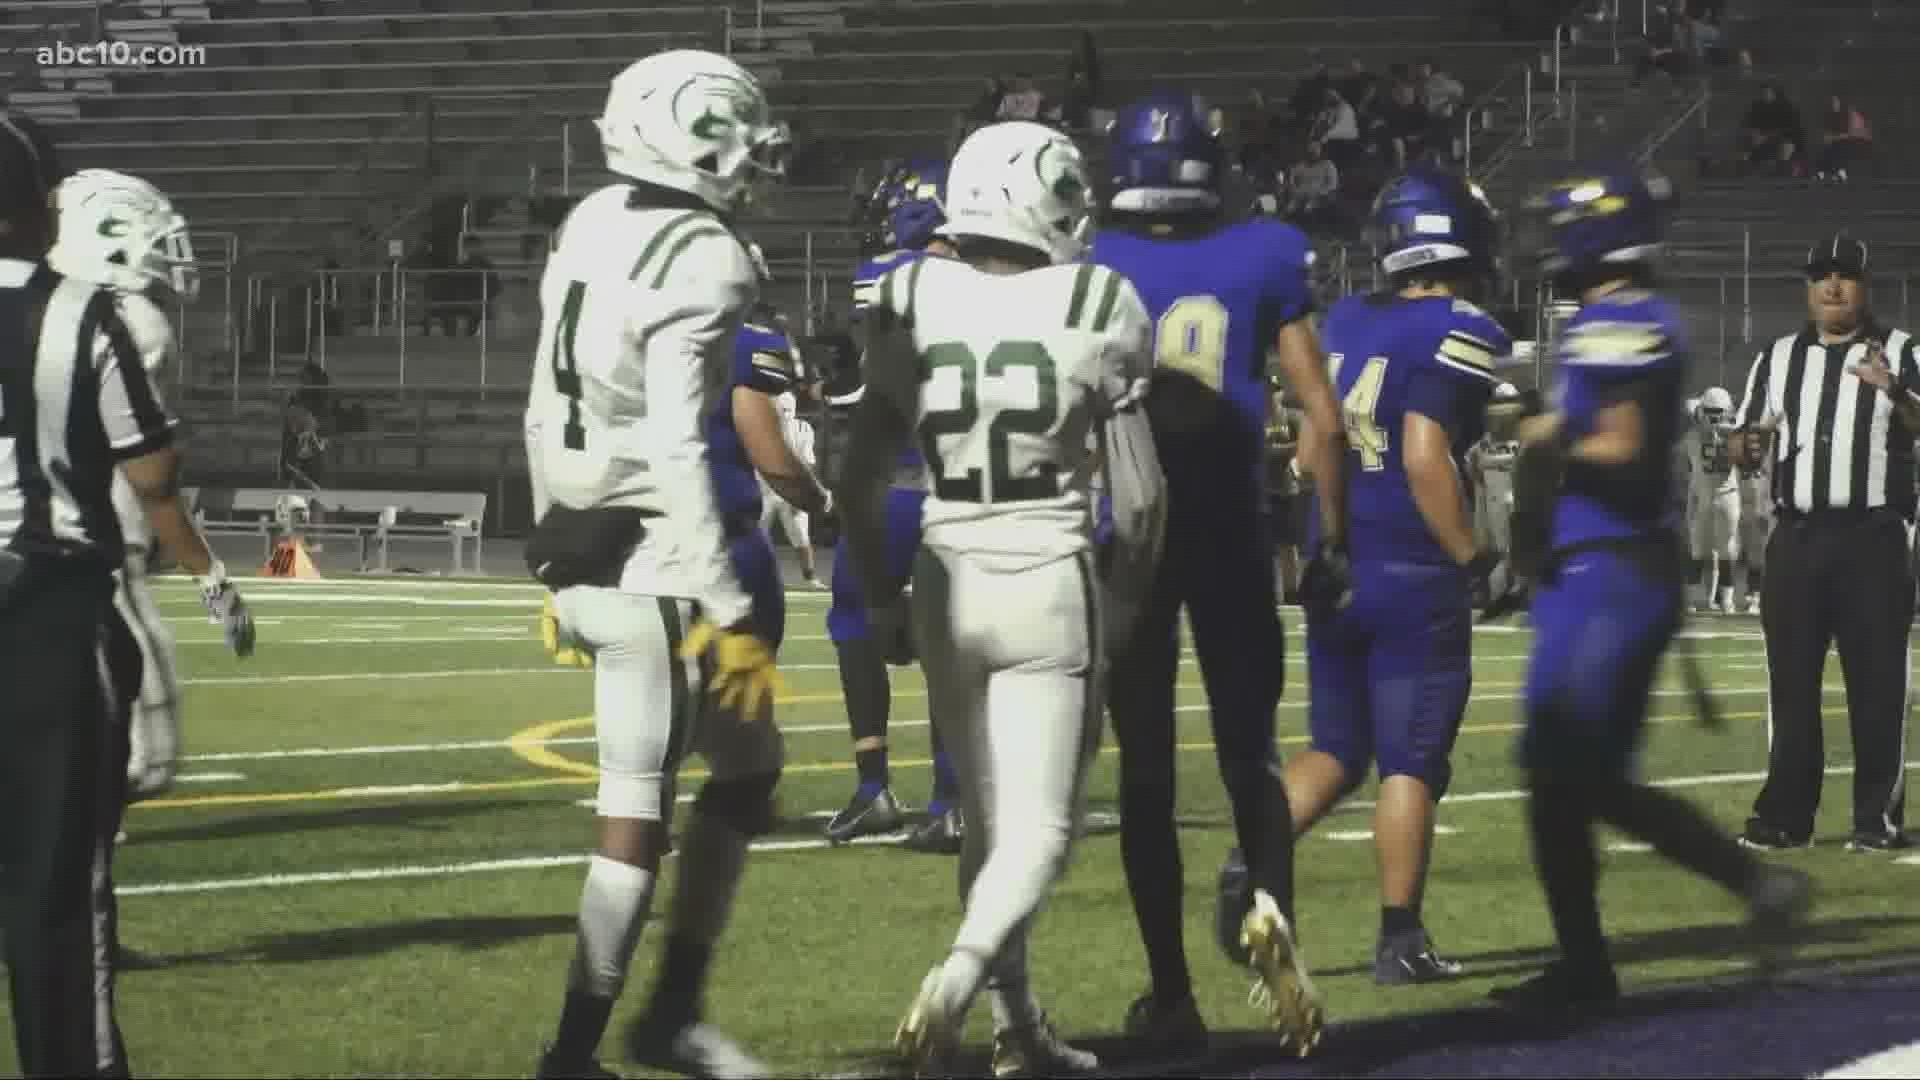 ABC10s Kevin John brings you another week of high school football highlights.